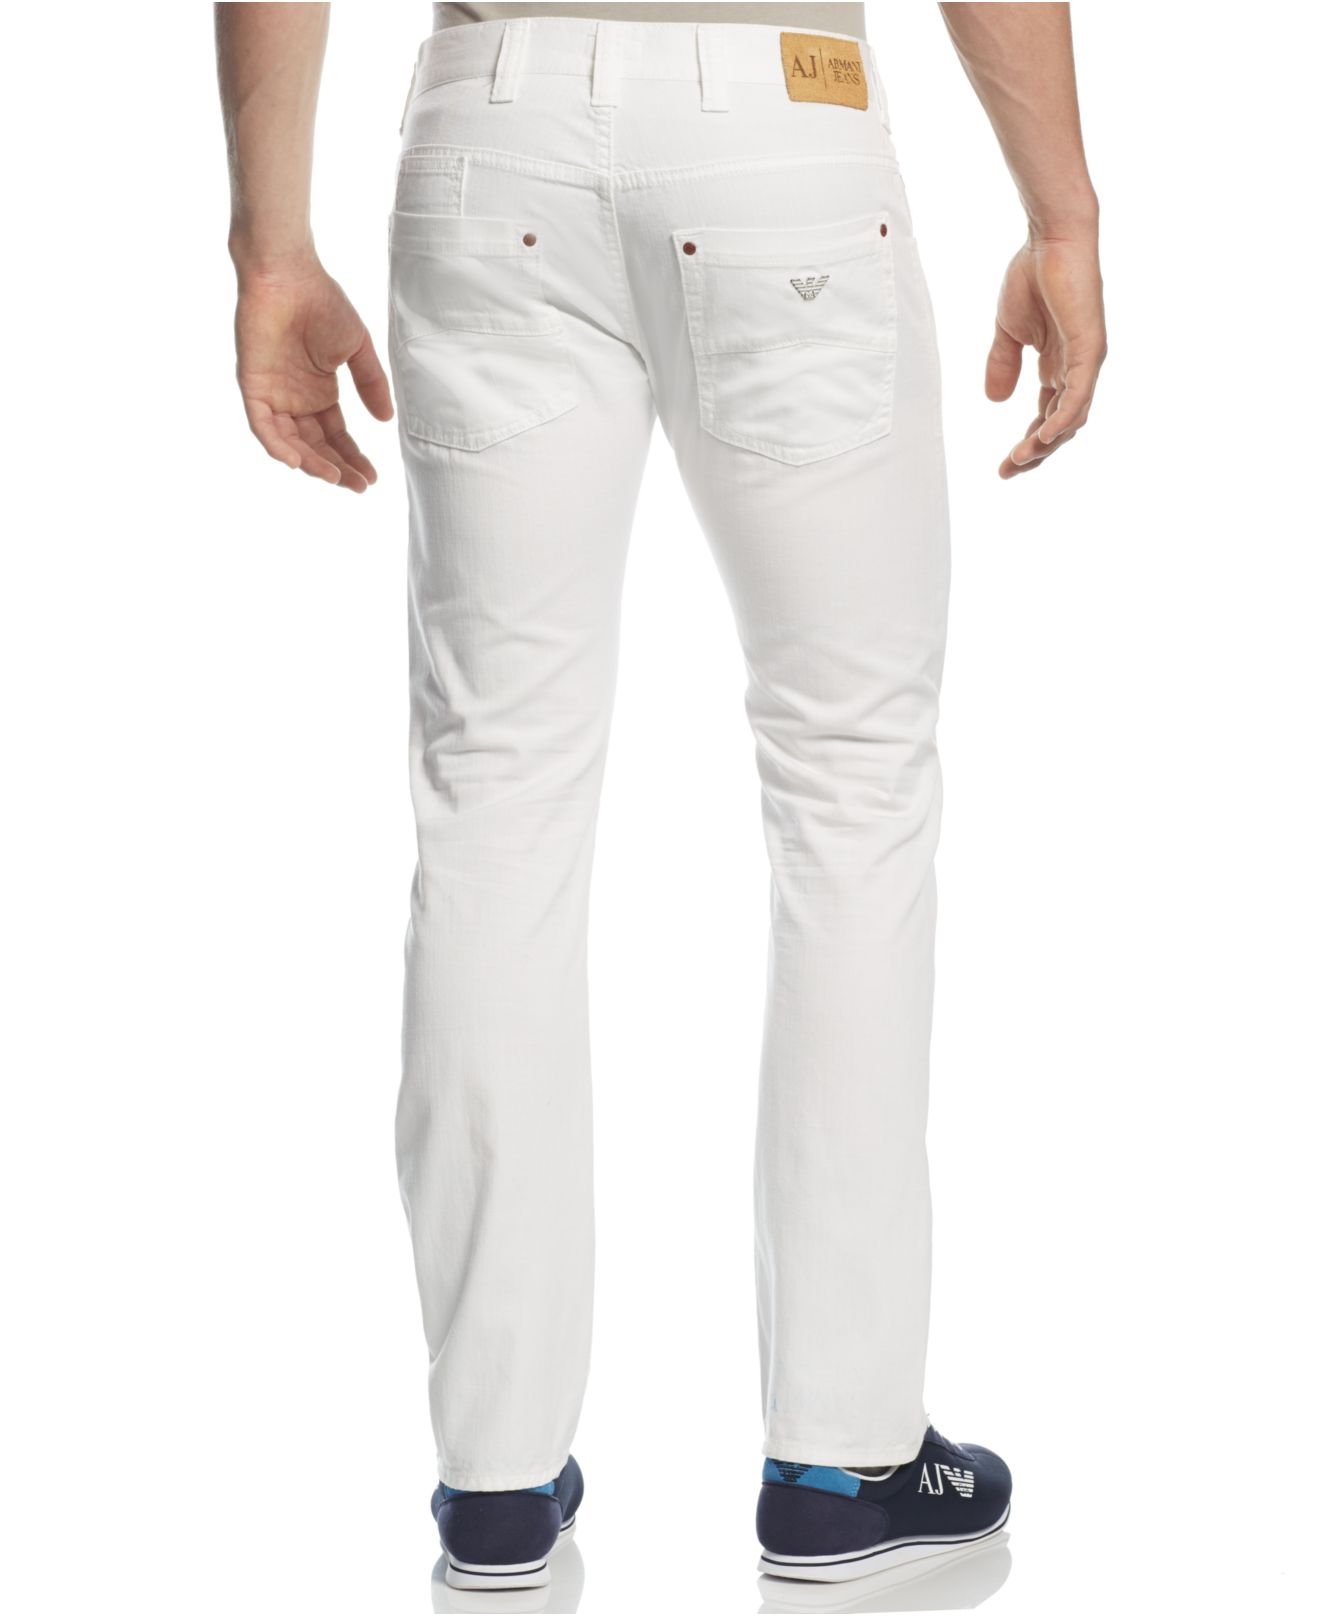 Lyst - Armani Jeans White Slim Straight Jeans in White for Men